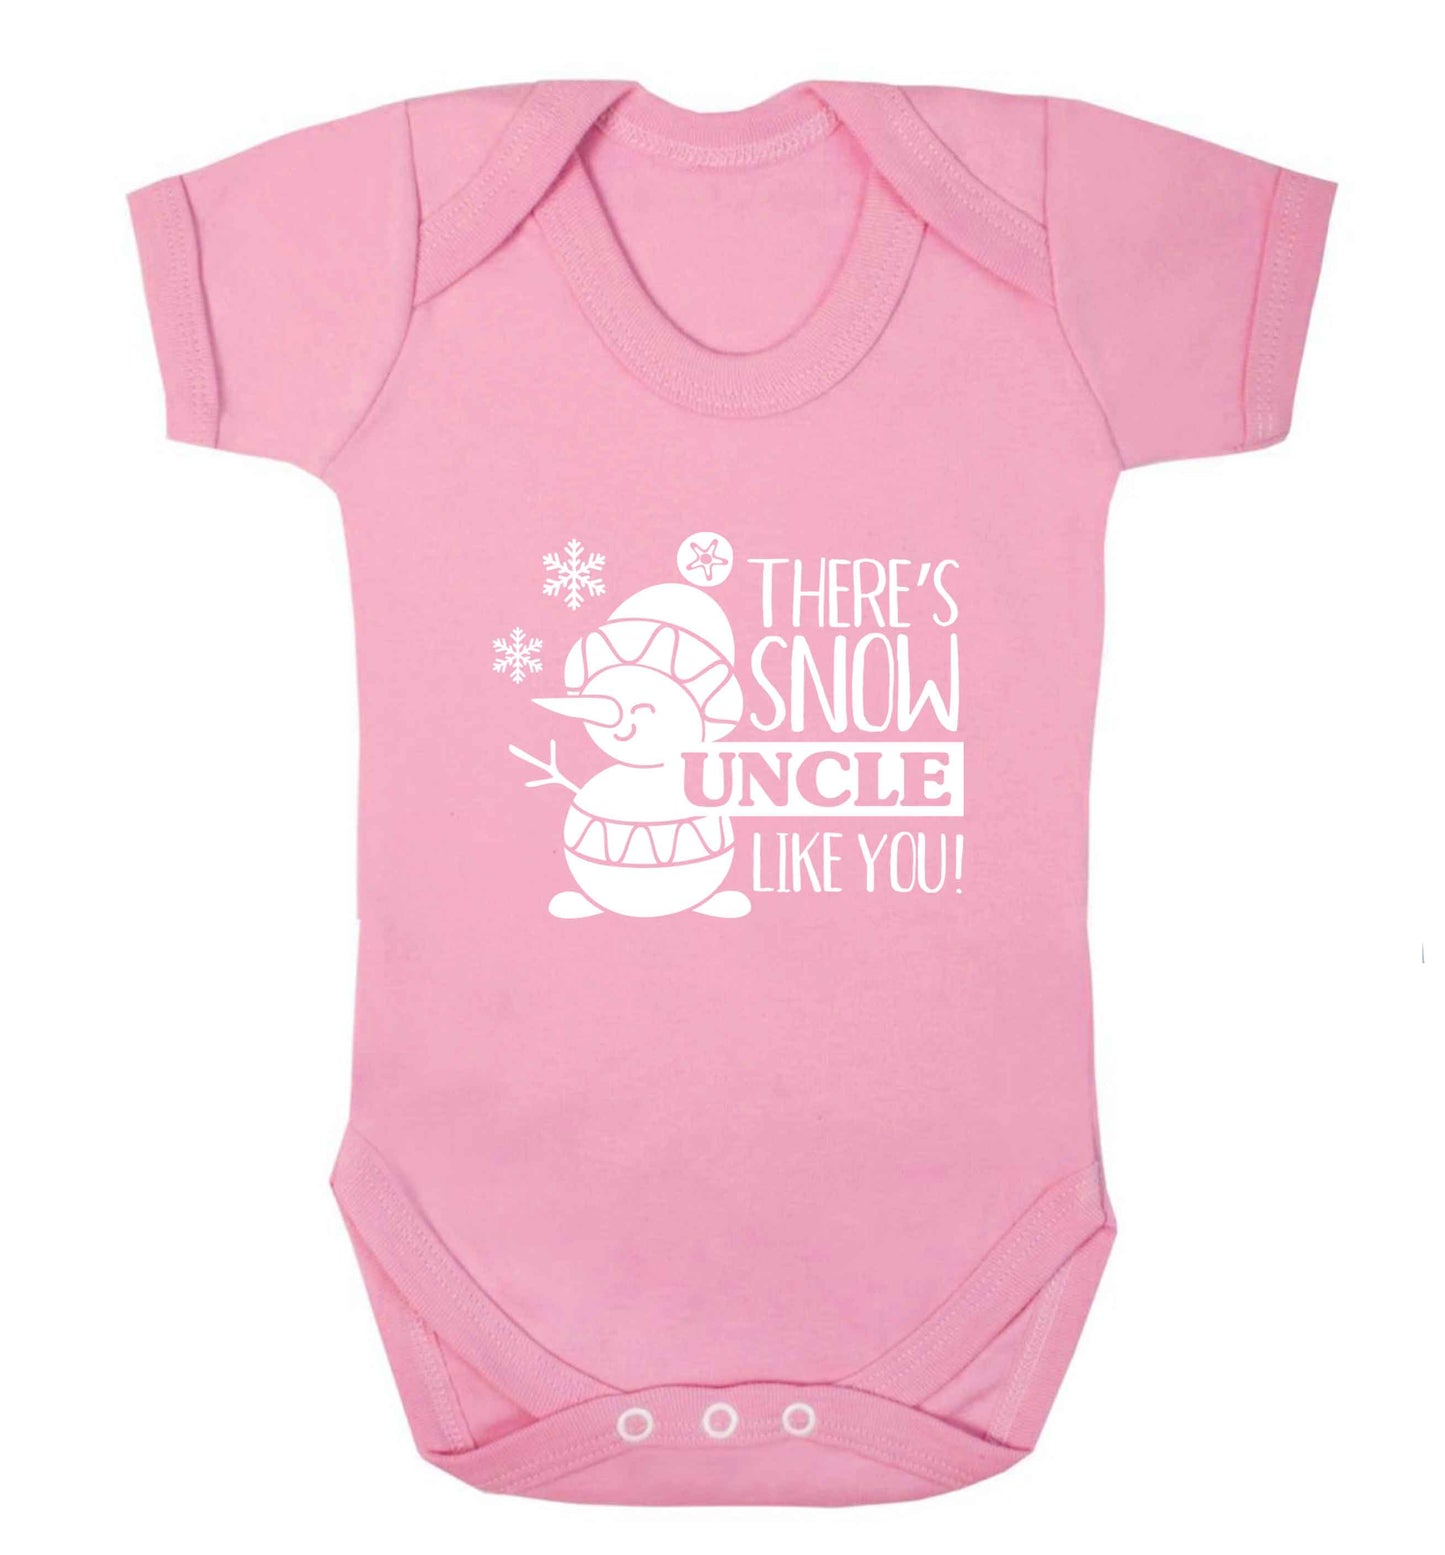 There's snow uncle like you baby vest pale pink 18-24 months